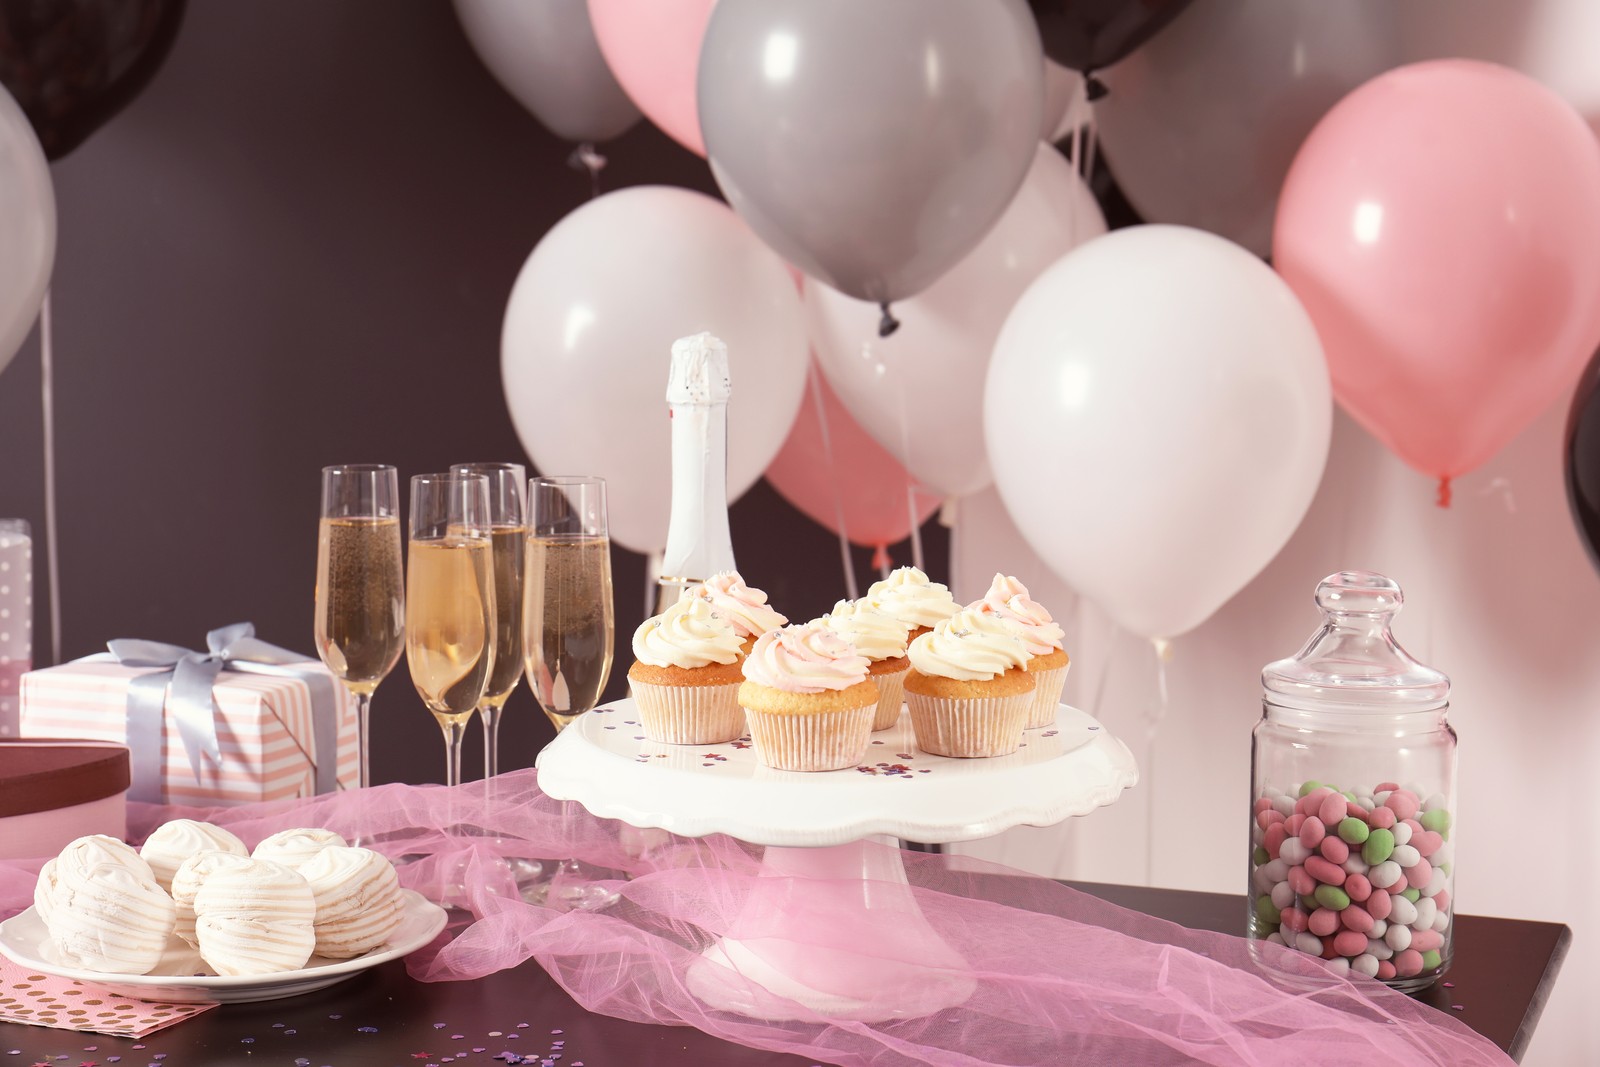 Photo of party treats on table in room decorated with balloons